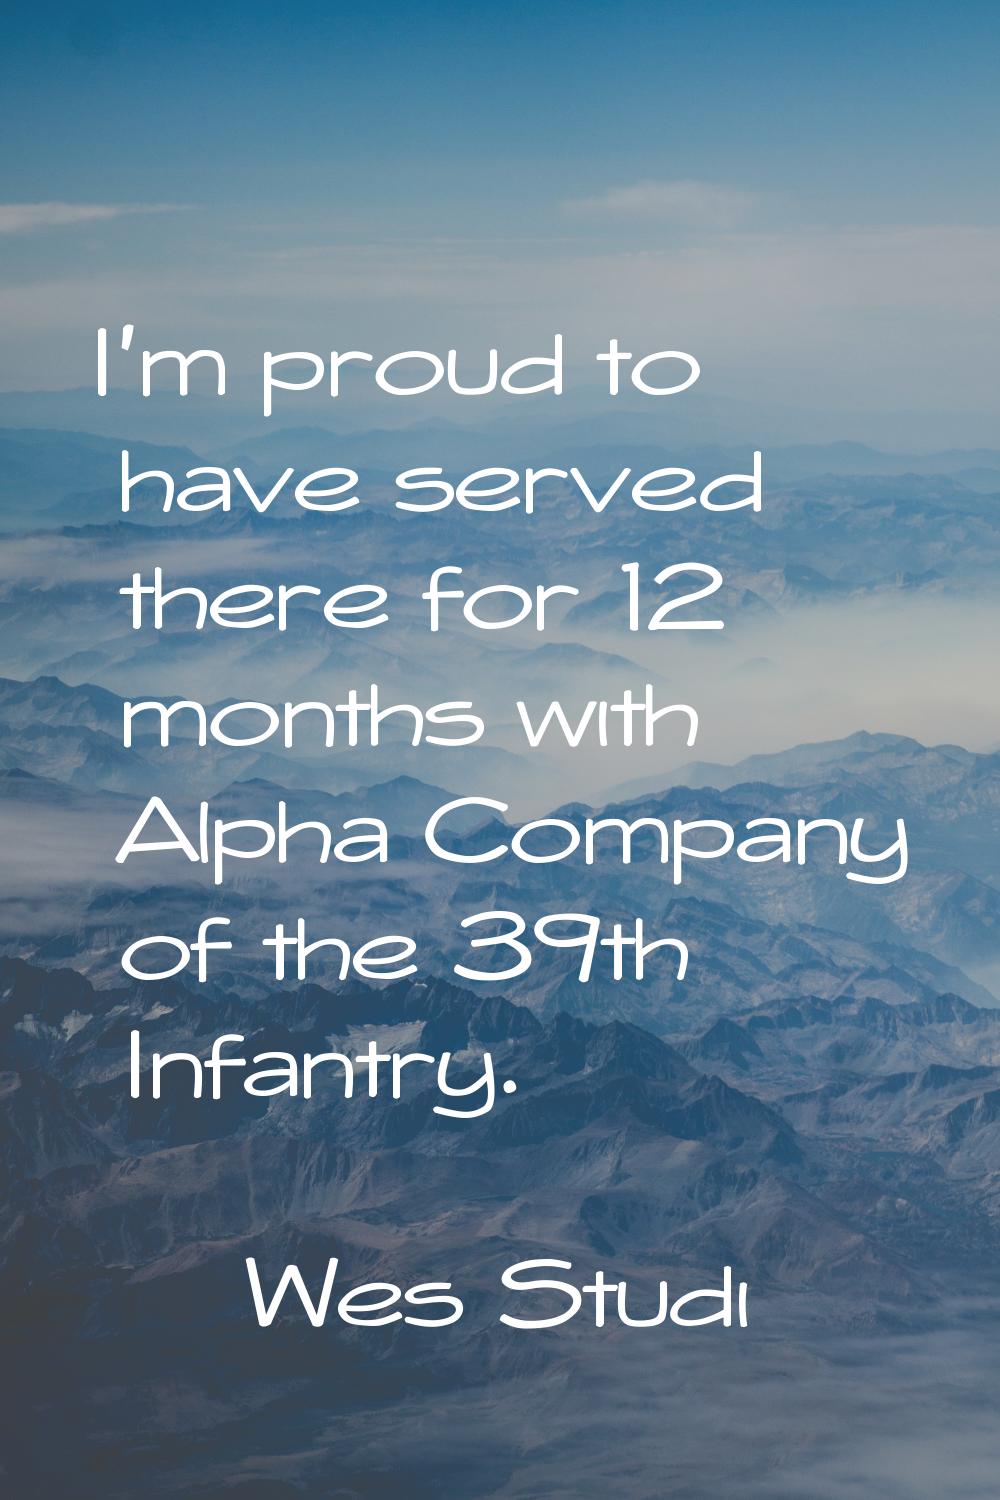 I'm proud to have served there for 12 months with Alpha Company of the 39th Infantry.